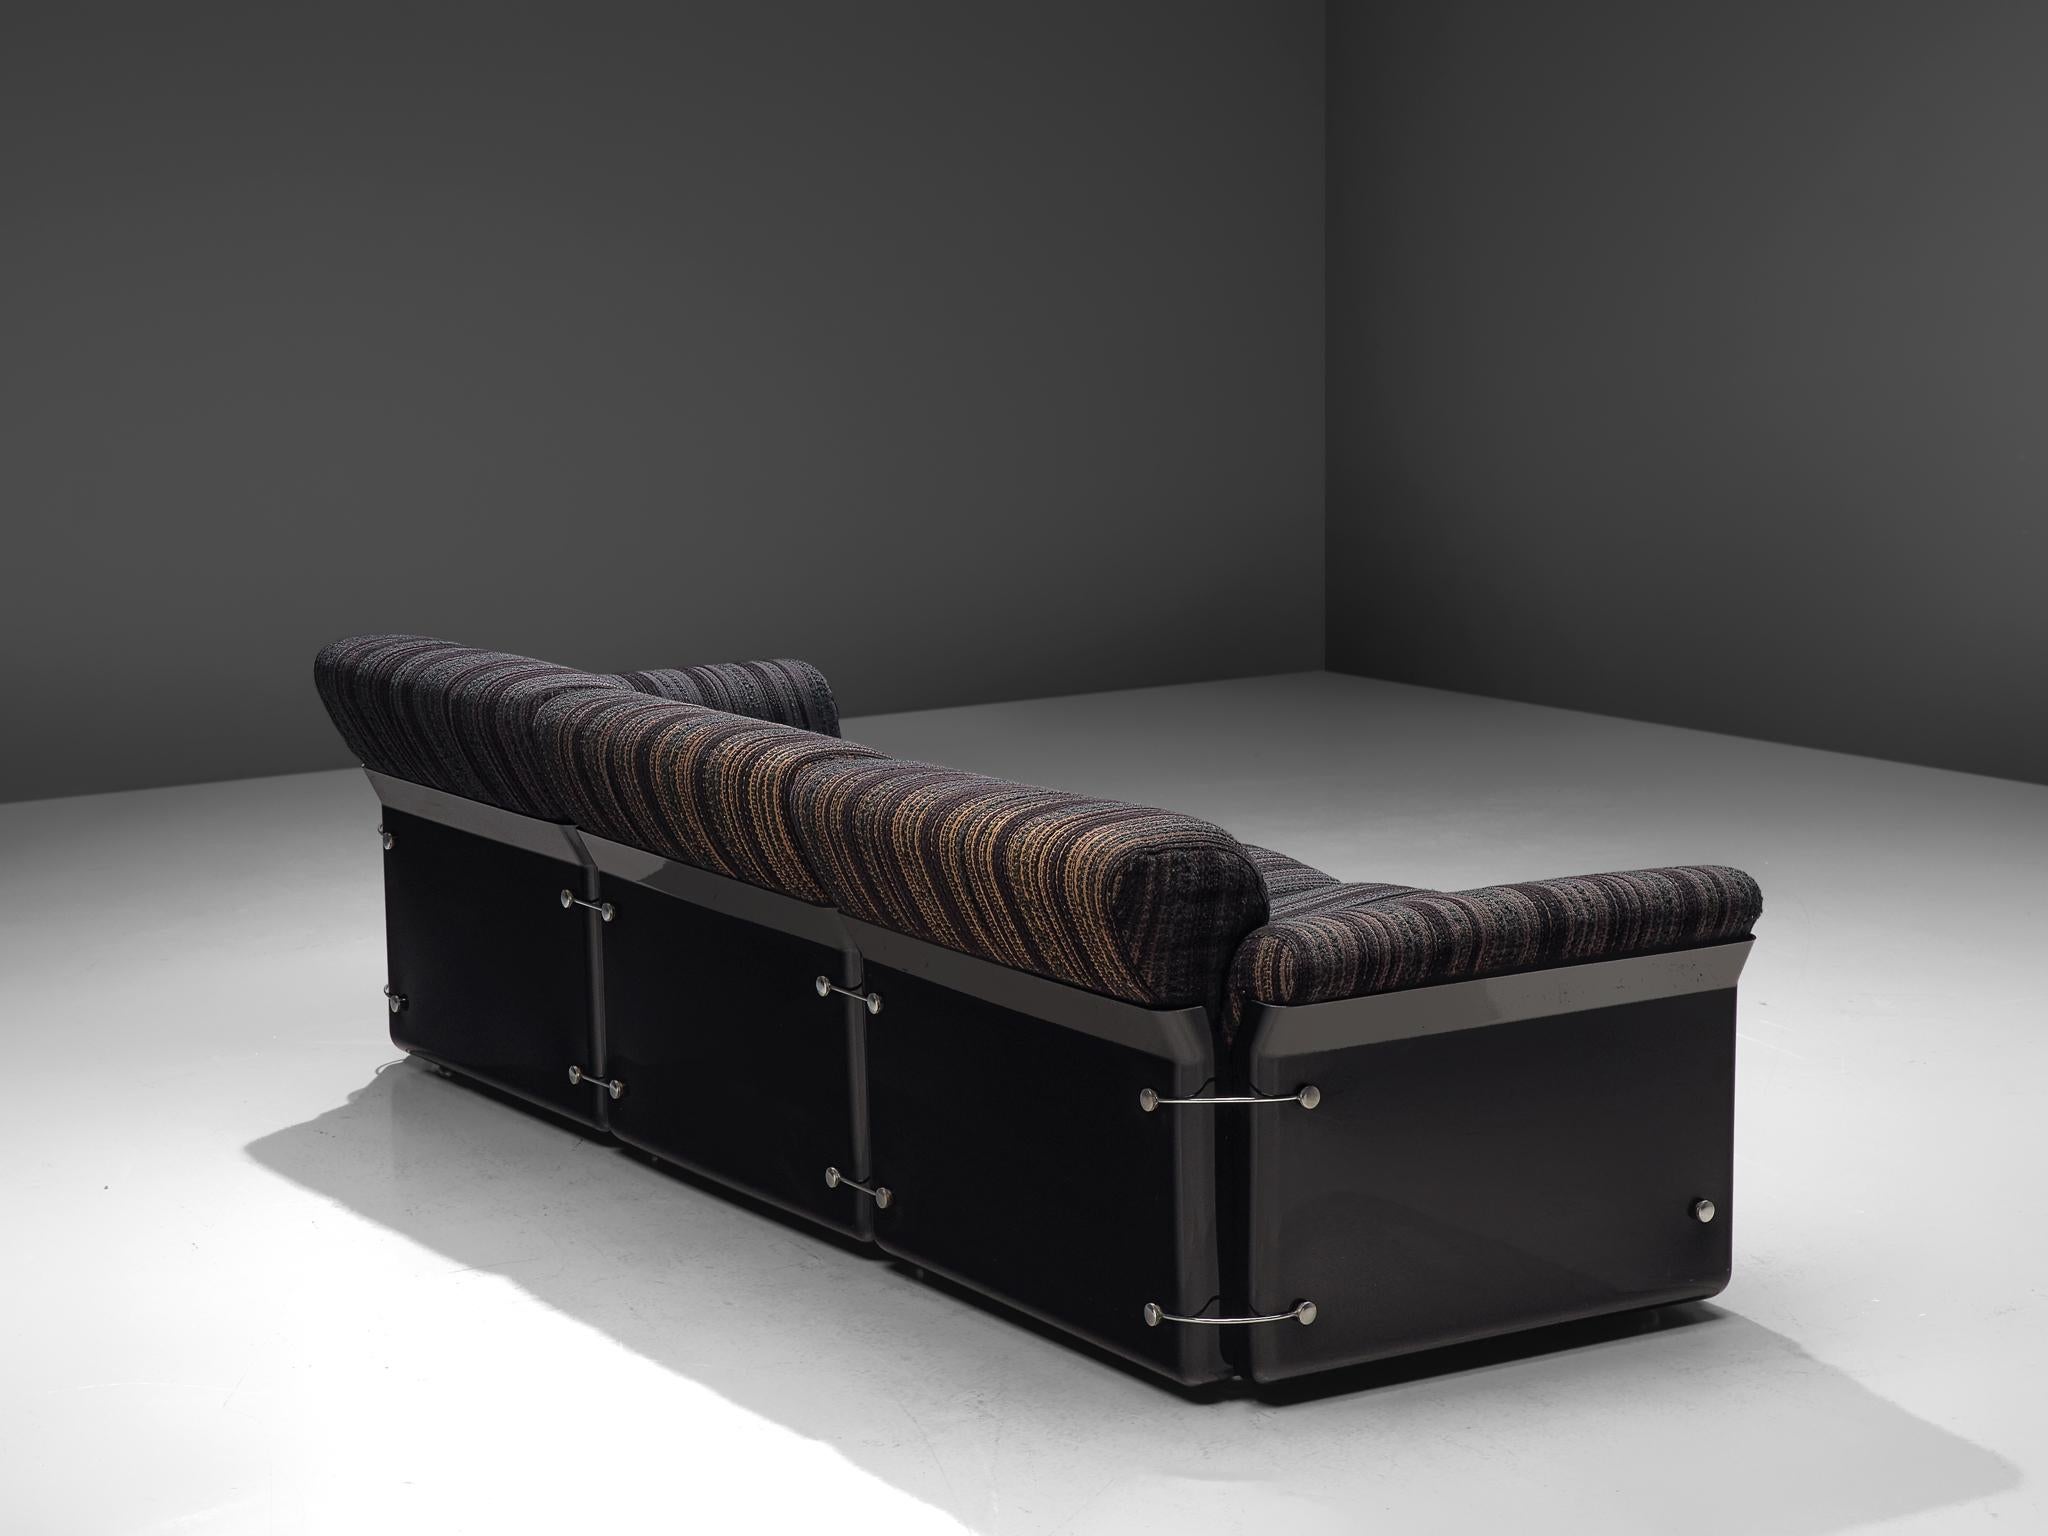 Vittorio Introini for Saporiti, three-seat sofa, fabric and chrome, Italy, 1969.

Bulky and sturdy 'Larissa' sofa designed by Vittorio Introini and produced by Saporiti in acrylic and dark blue/black striped upholstery. The pieces features a black